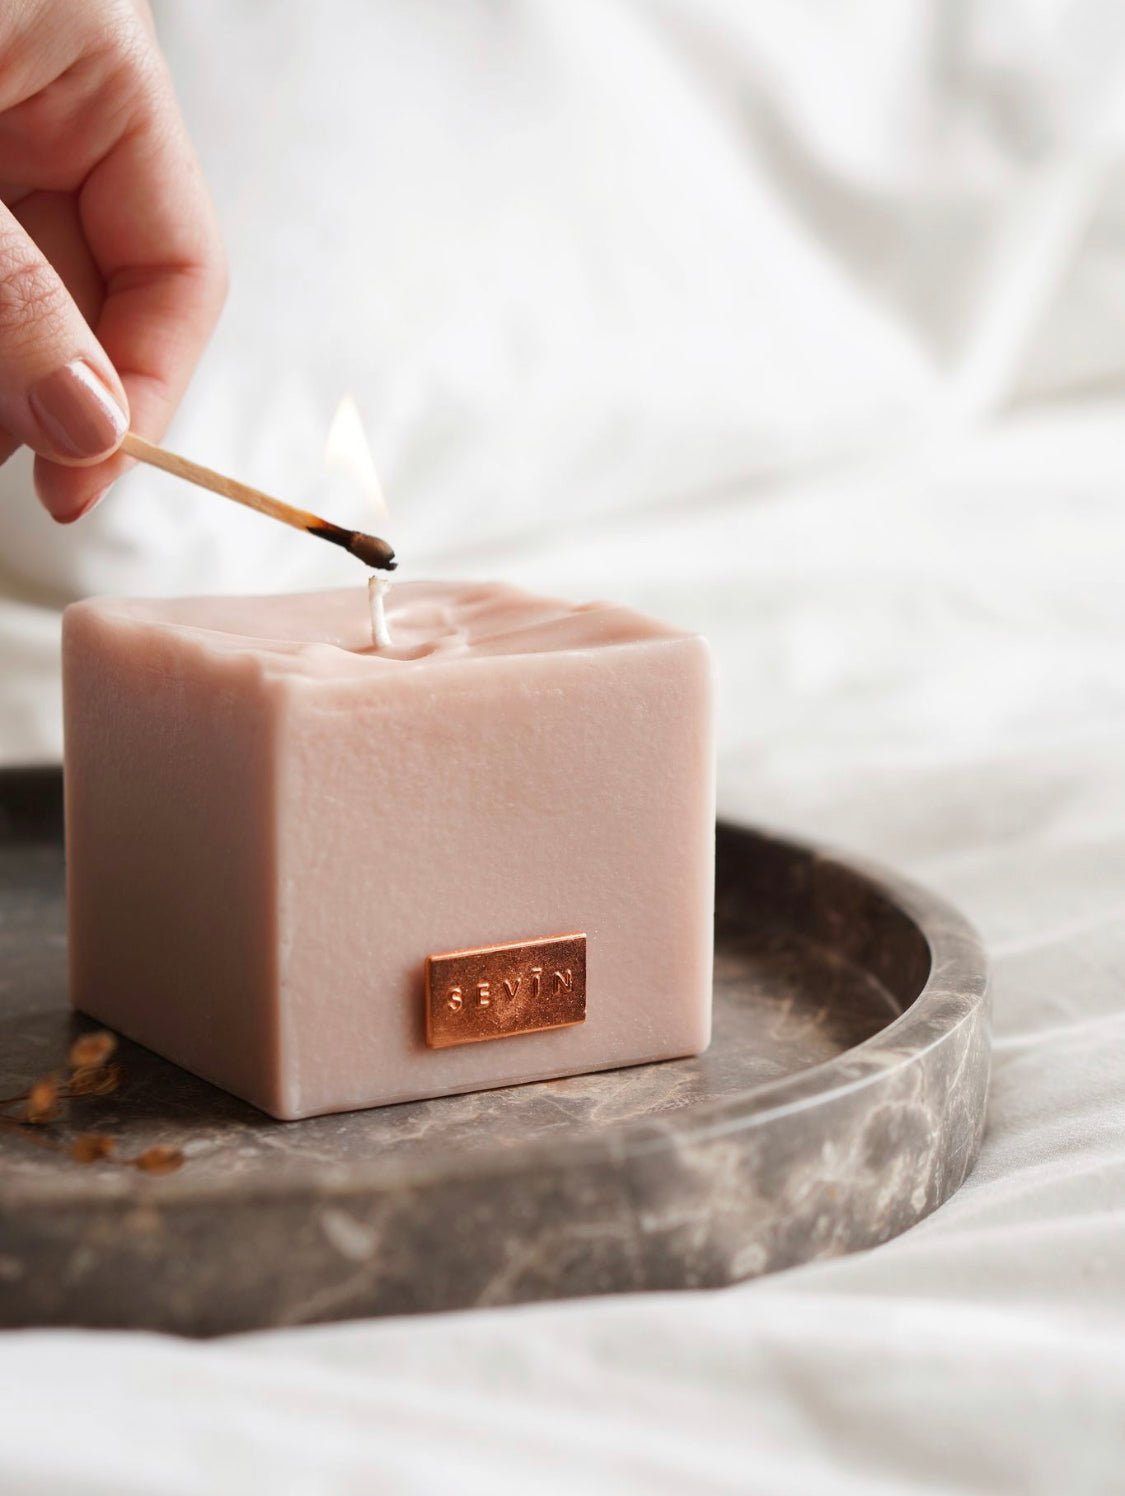 Sevin London 珊瑚粉香氛蠟燭 Coral Clay Scented Candle Small - IOSOI Skin Lab